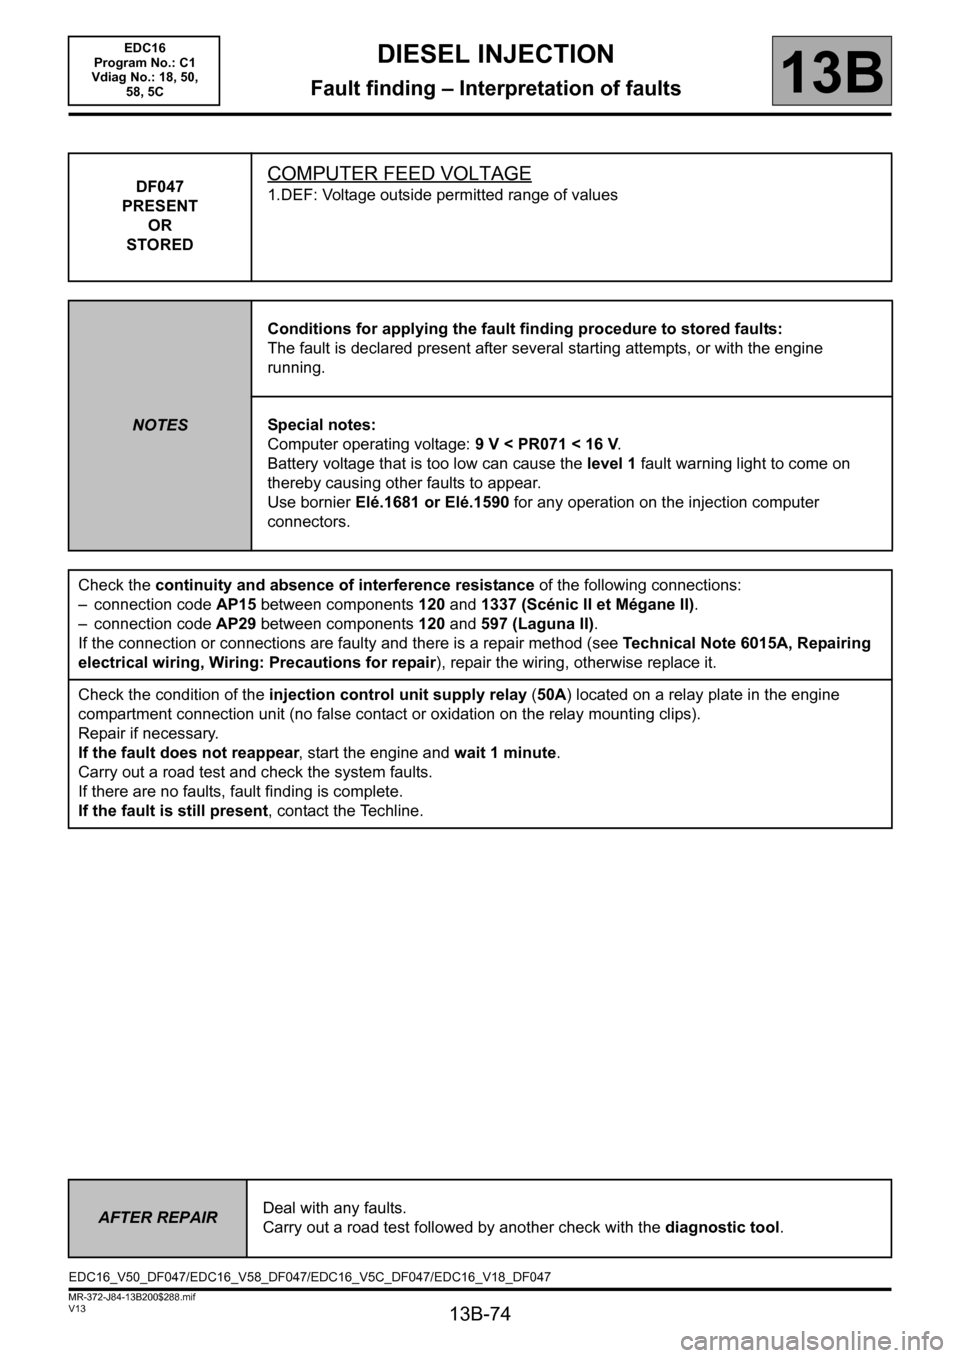 RENAULT SCENIC 2011 J95 / 3.G Engine And Peripherals EDC16 Manual PDF 13B-74
MR-372-J84-13B200$288.mif
V13
13B
DIESEL INJECTION
Fault finding – Interpretation of faults
DF047
PRESENT
OR
STOREDCOMPUTER FEED VOLTAGE
1.DEF: Voltage outside permitted range of values
NOTES